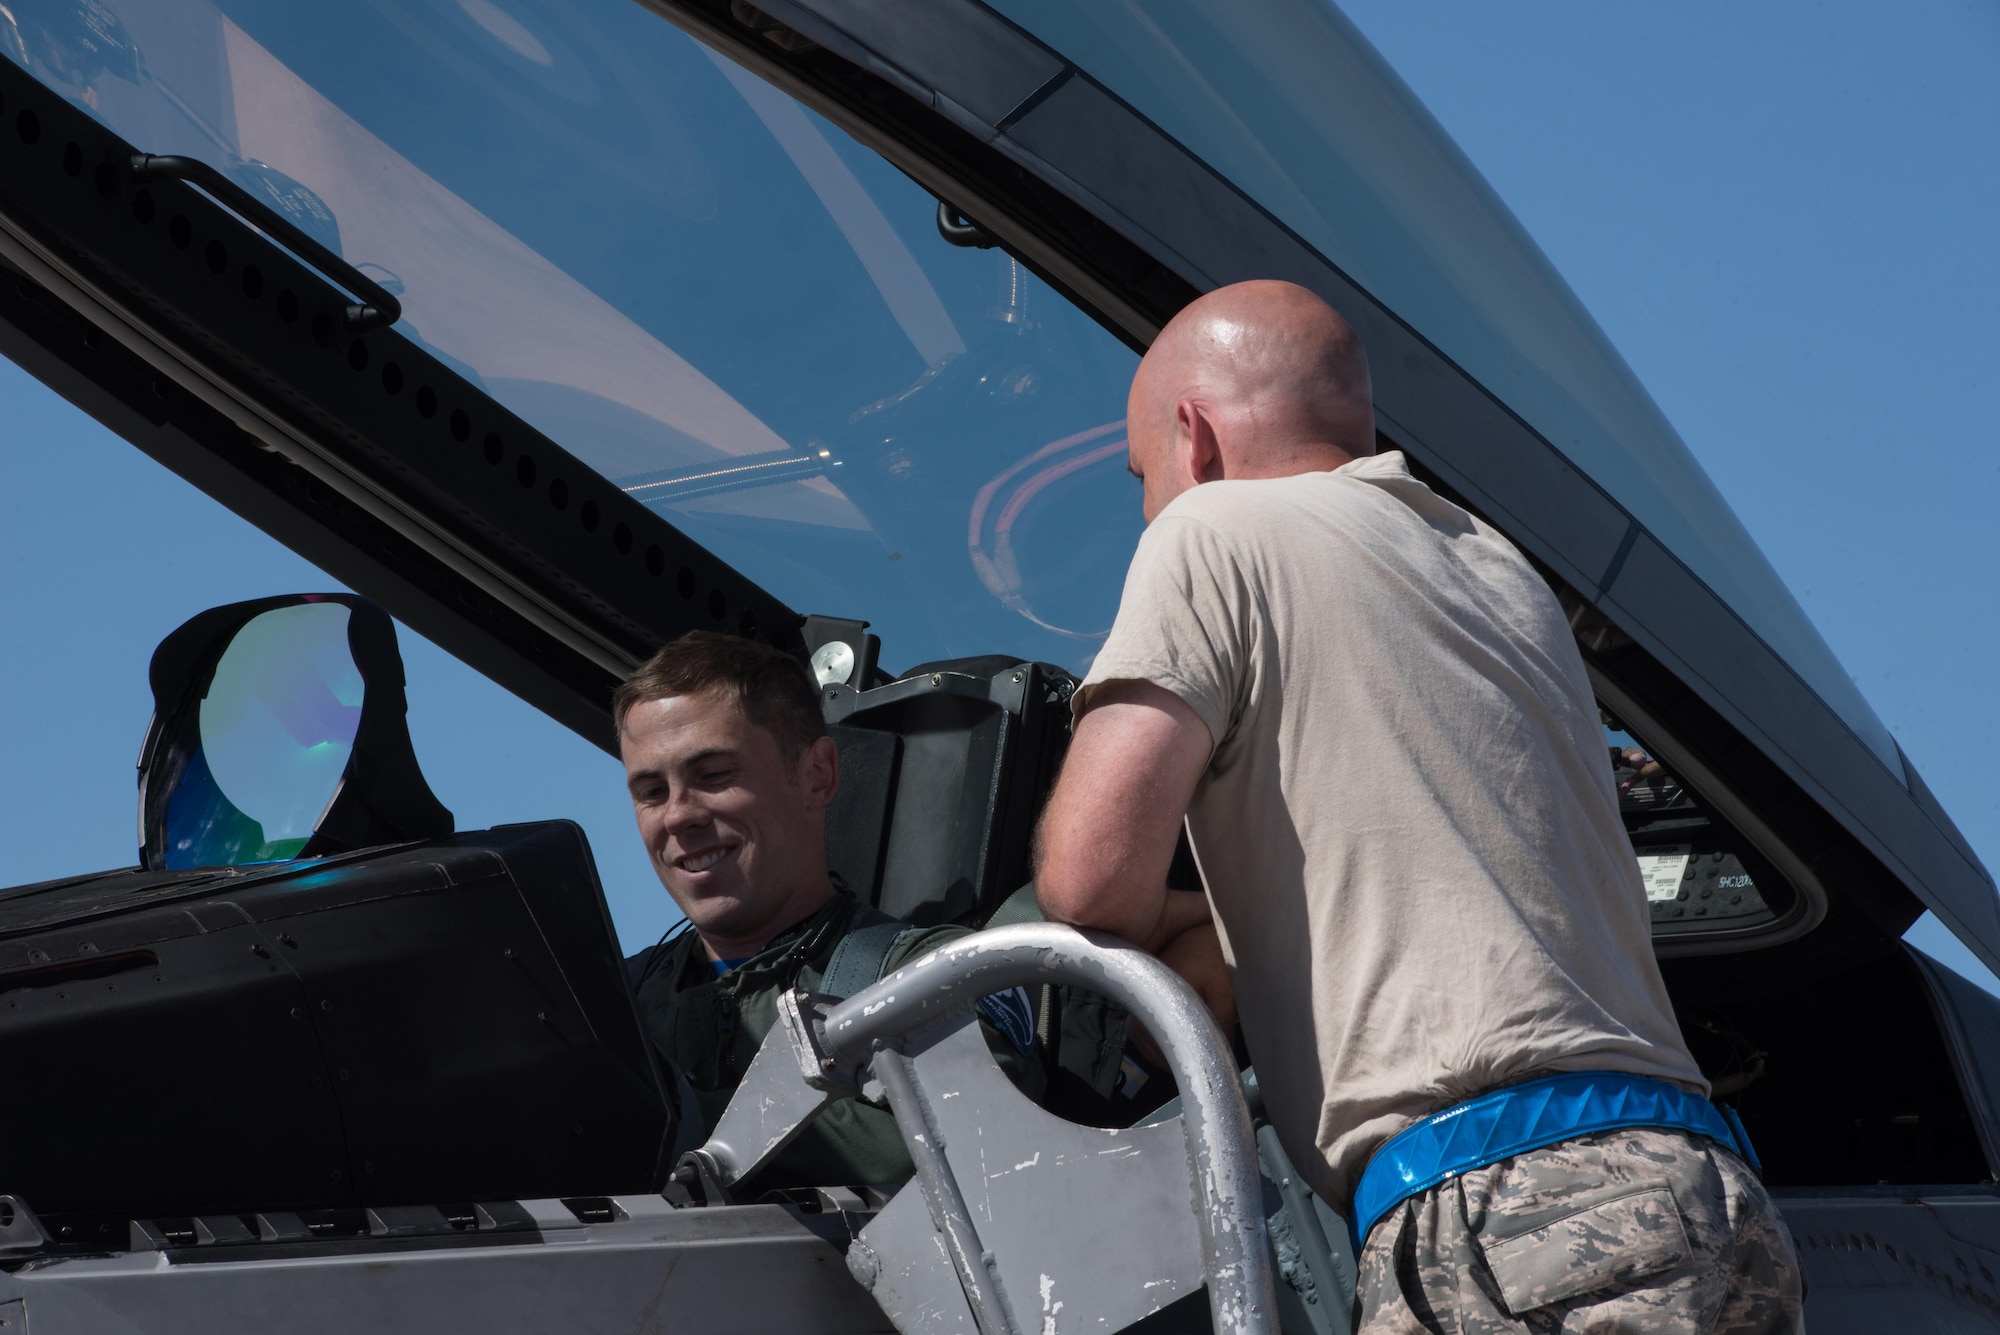 U.S Air Force Capt. Kidnap, 94th Fighter Squadron F-22 Raptor pilot speaks with U.S. Air Force Staff Sgt. Courtney Puyear, 94th Aircraft Maintenance Unit crew chief, after landing at Nellis Air Force Base, Nev. Aug. 18, 2017.  The 94th FS is currently deployed to Red Flag 17-4, taking part in an multi-dimensional simulated air and ground combat environment. (U.S. Air Force photo by Staff Sgt. Carlin Leslie)